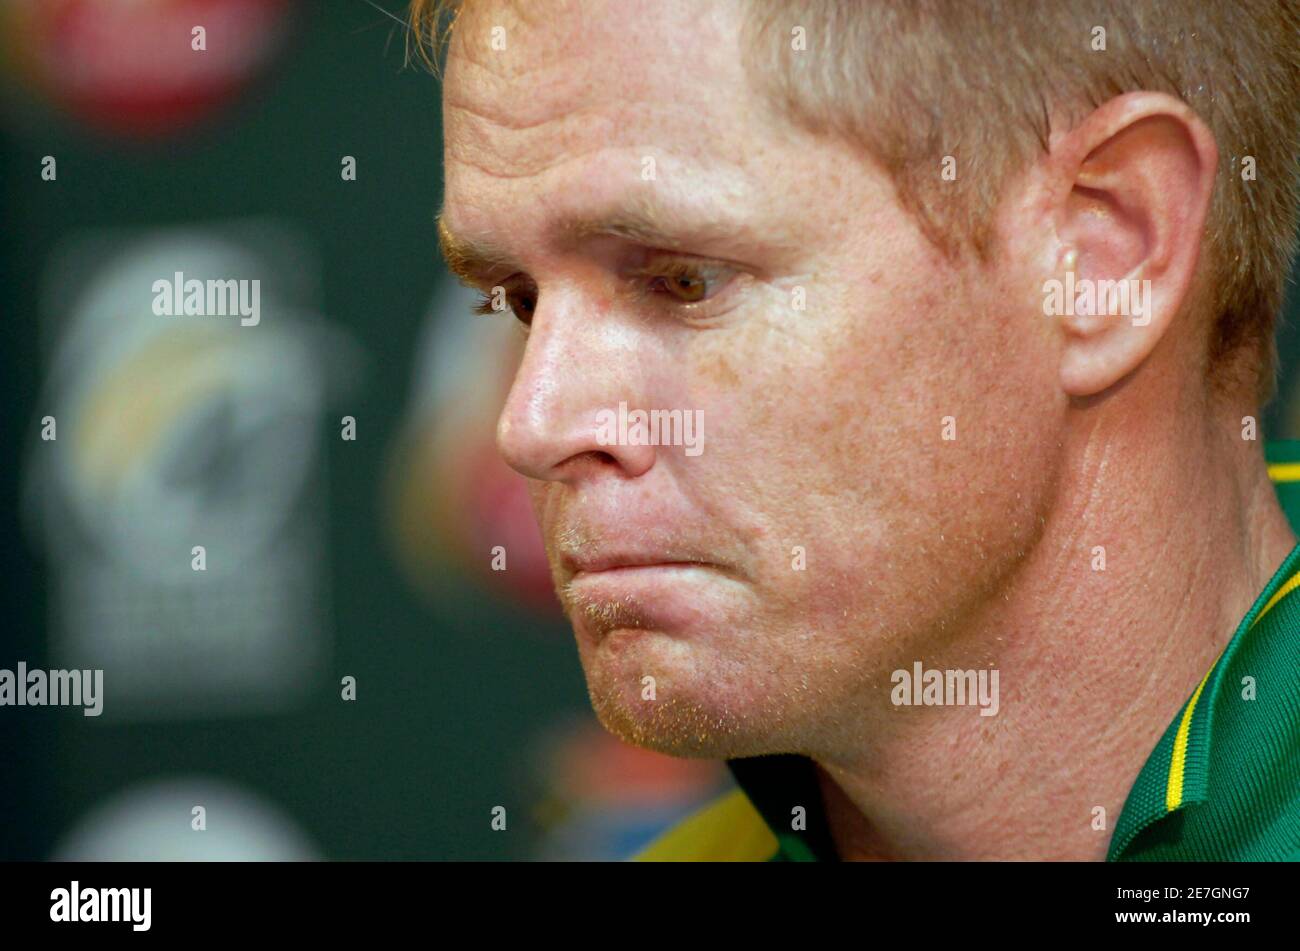 South Africa's Shaun Pollock announces his retirement from cricket after the second day's play of the third test cricket match against the West Indies in Durban January 11, 2008. Pollock, 34, said the current third test against West Indies, his 108th test, would be his last. But he said he would remain available for South Africa's five-match one-day series against West Indies. REUTERS/Rogan Ward (SOUTH AFRICA) Stock Photo